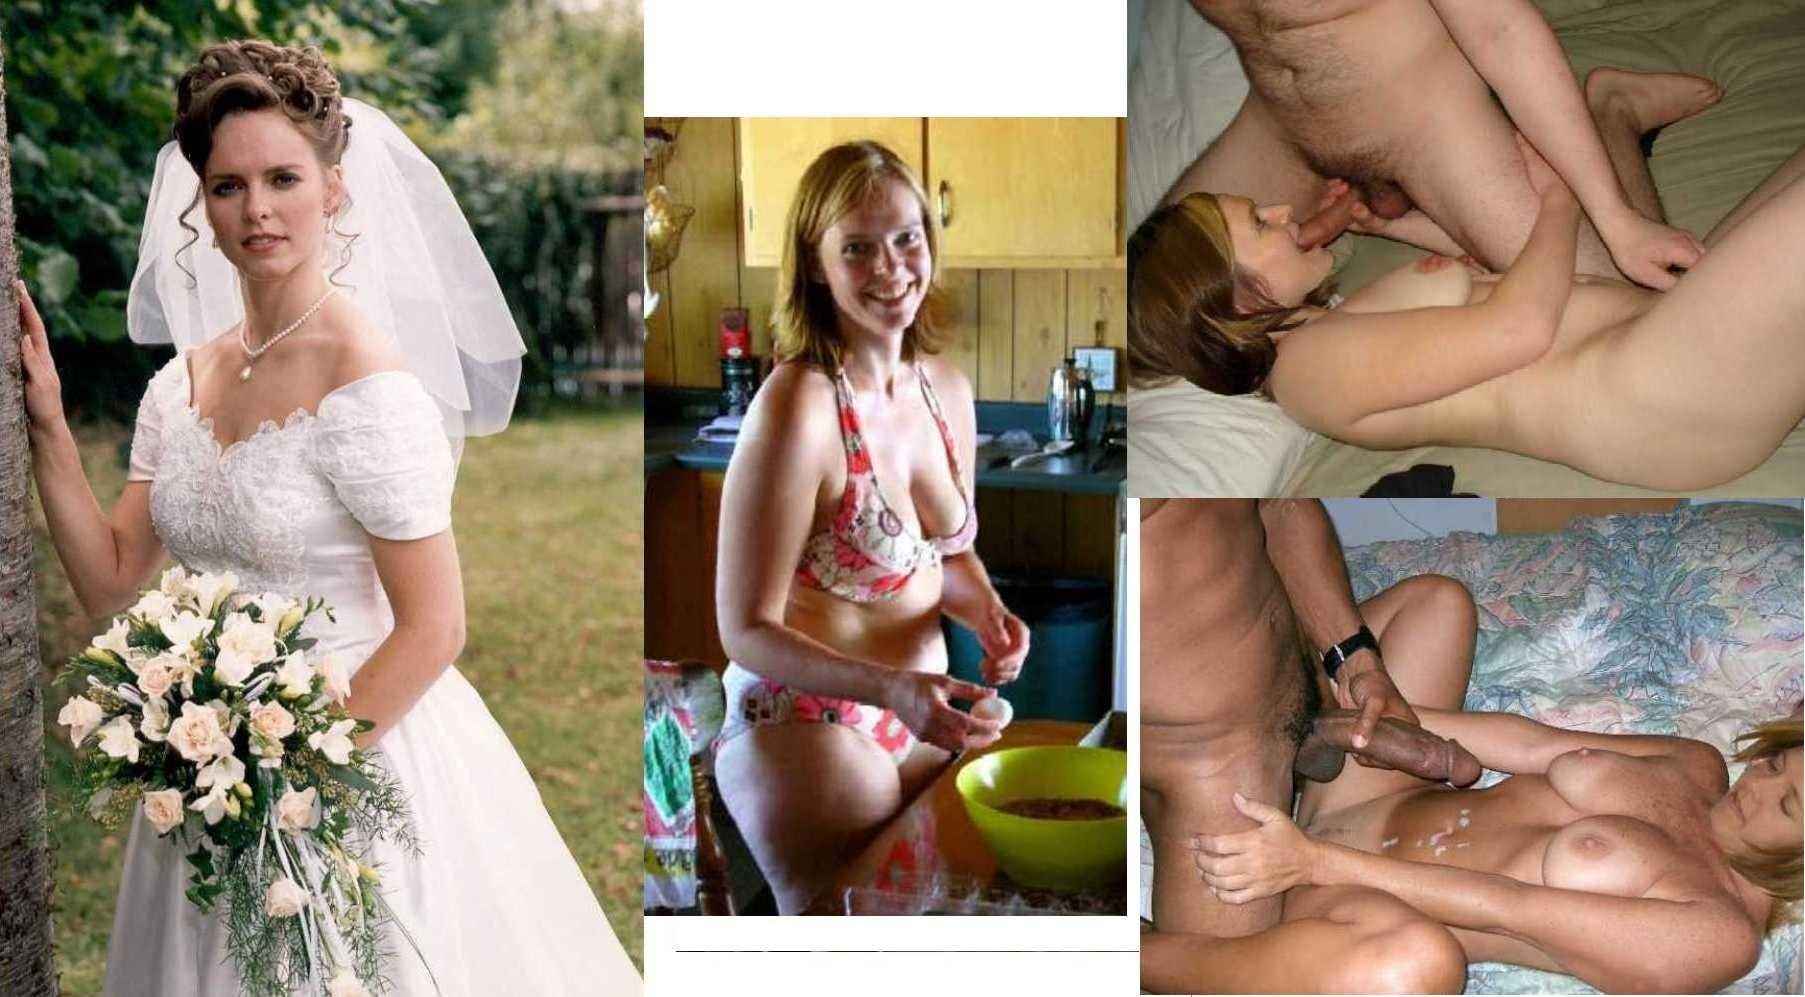 Married Porn - Russian Personally Filmed Porn of Married Women (72 photos) - motherless  porn pics